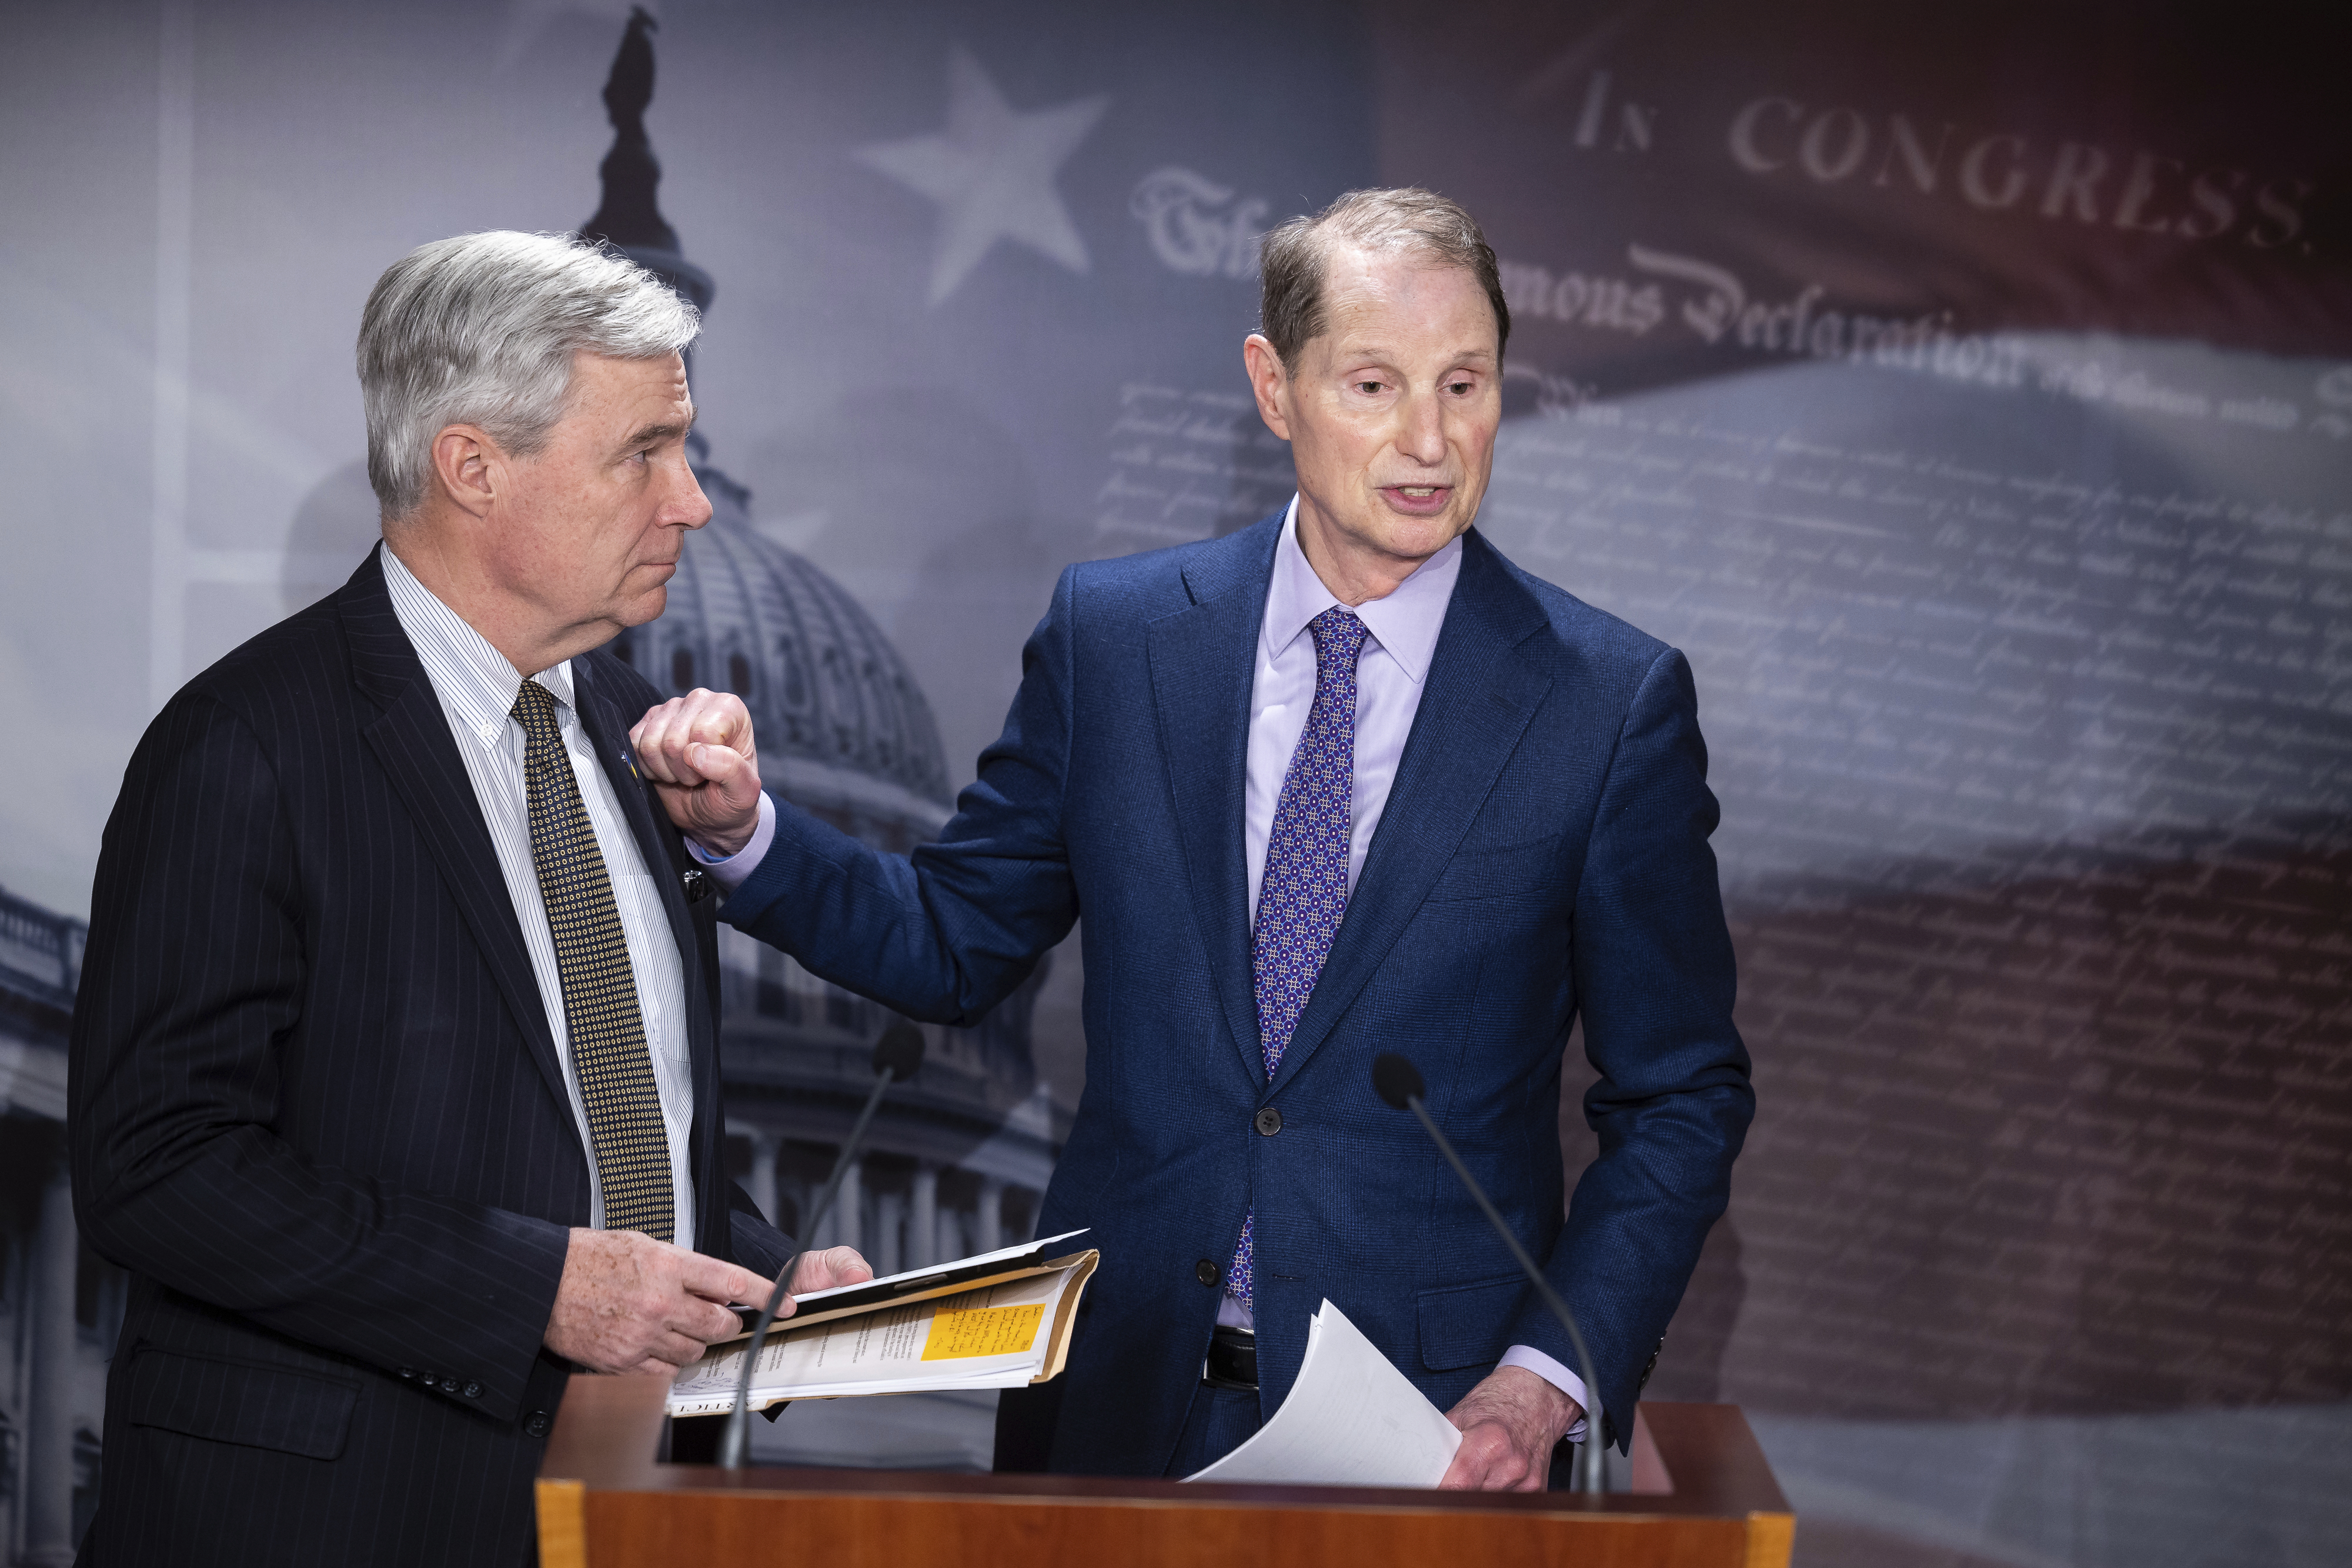 Senators Sheldon Whitehouse and Ron Wyden take part in a press conference.